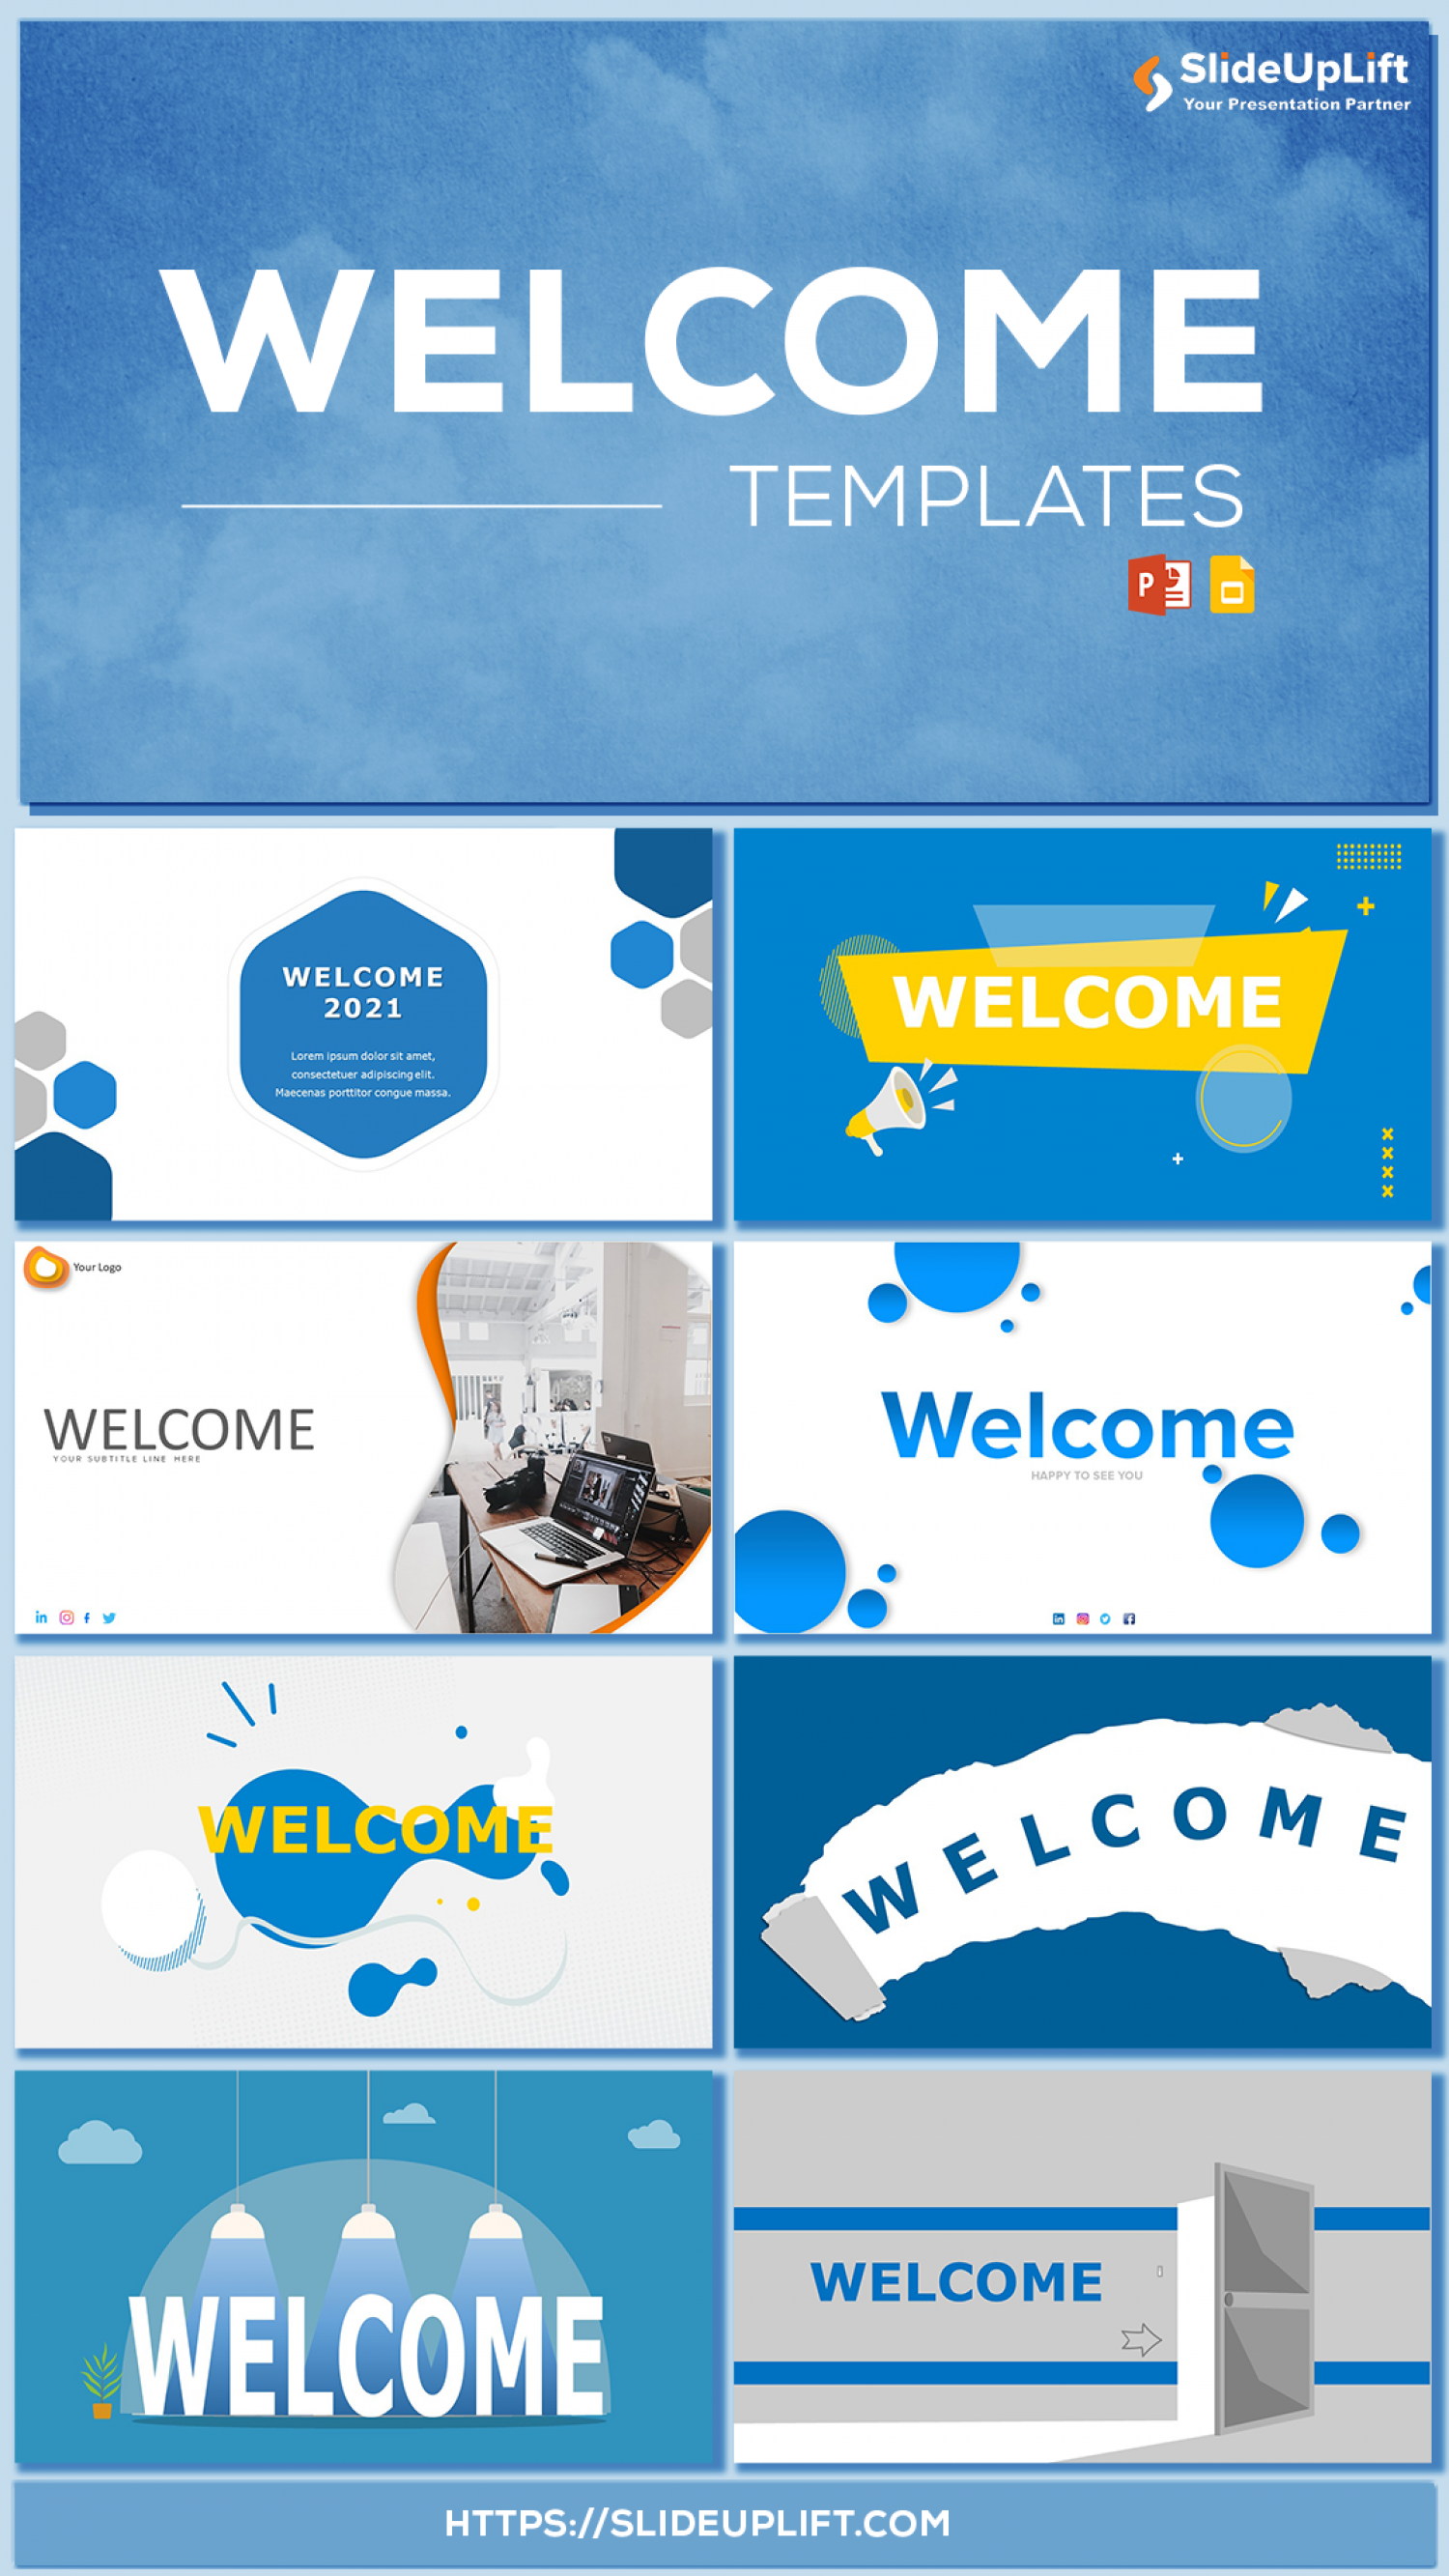 Welcome Templates Infographic